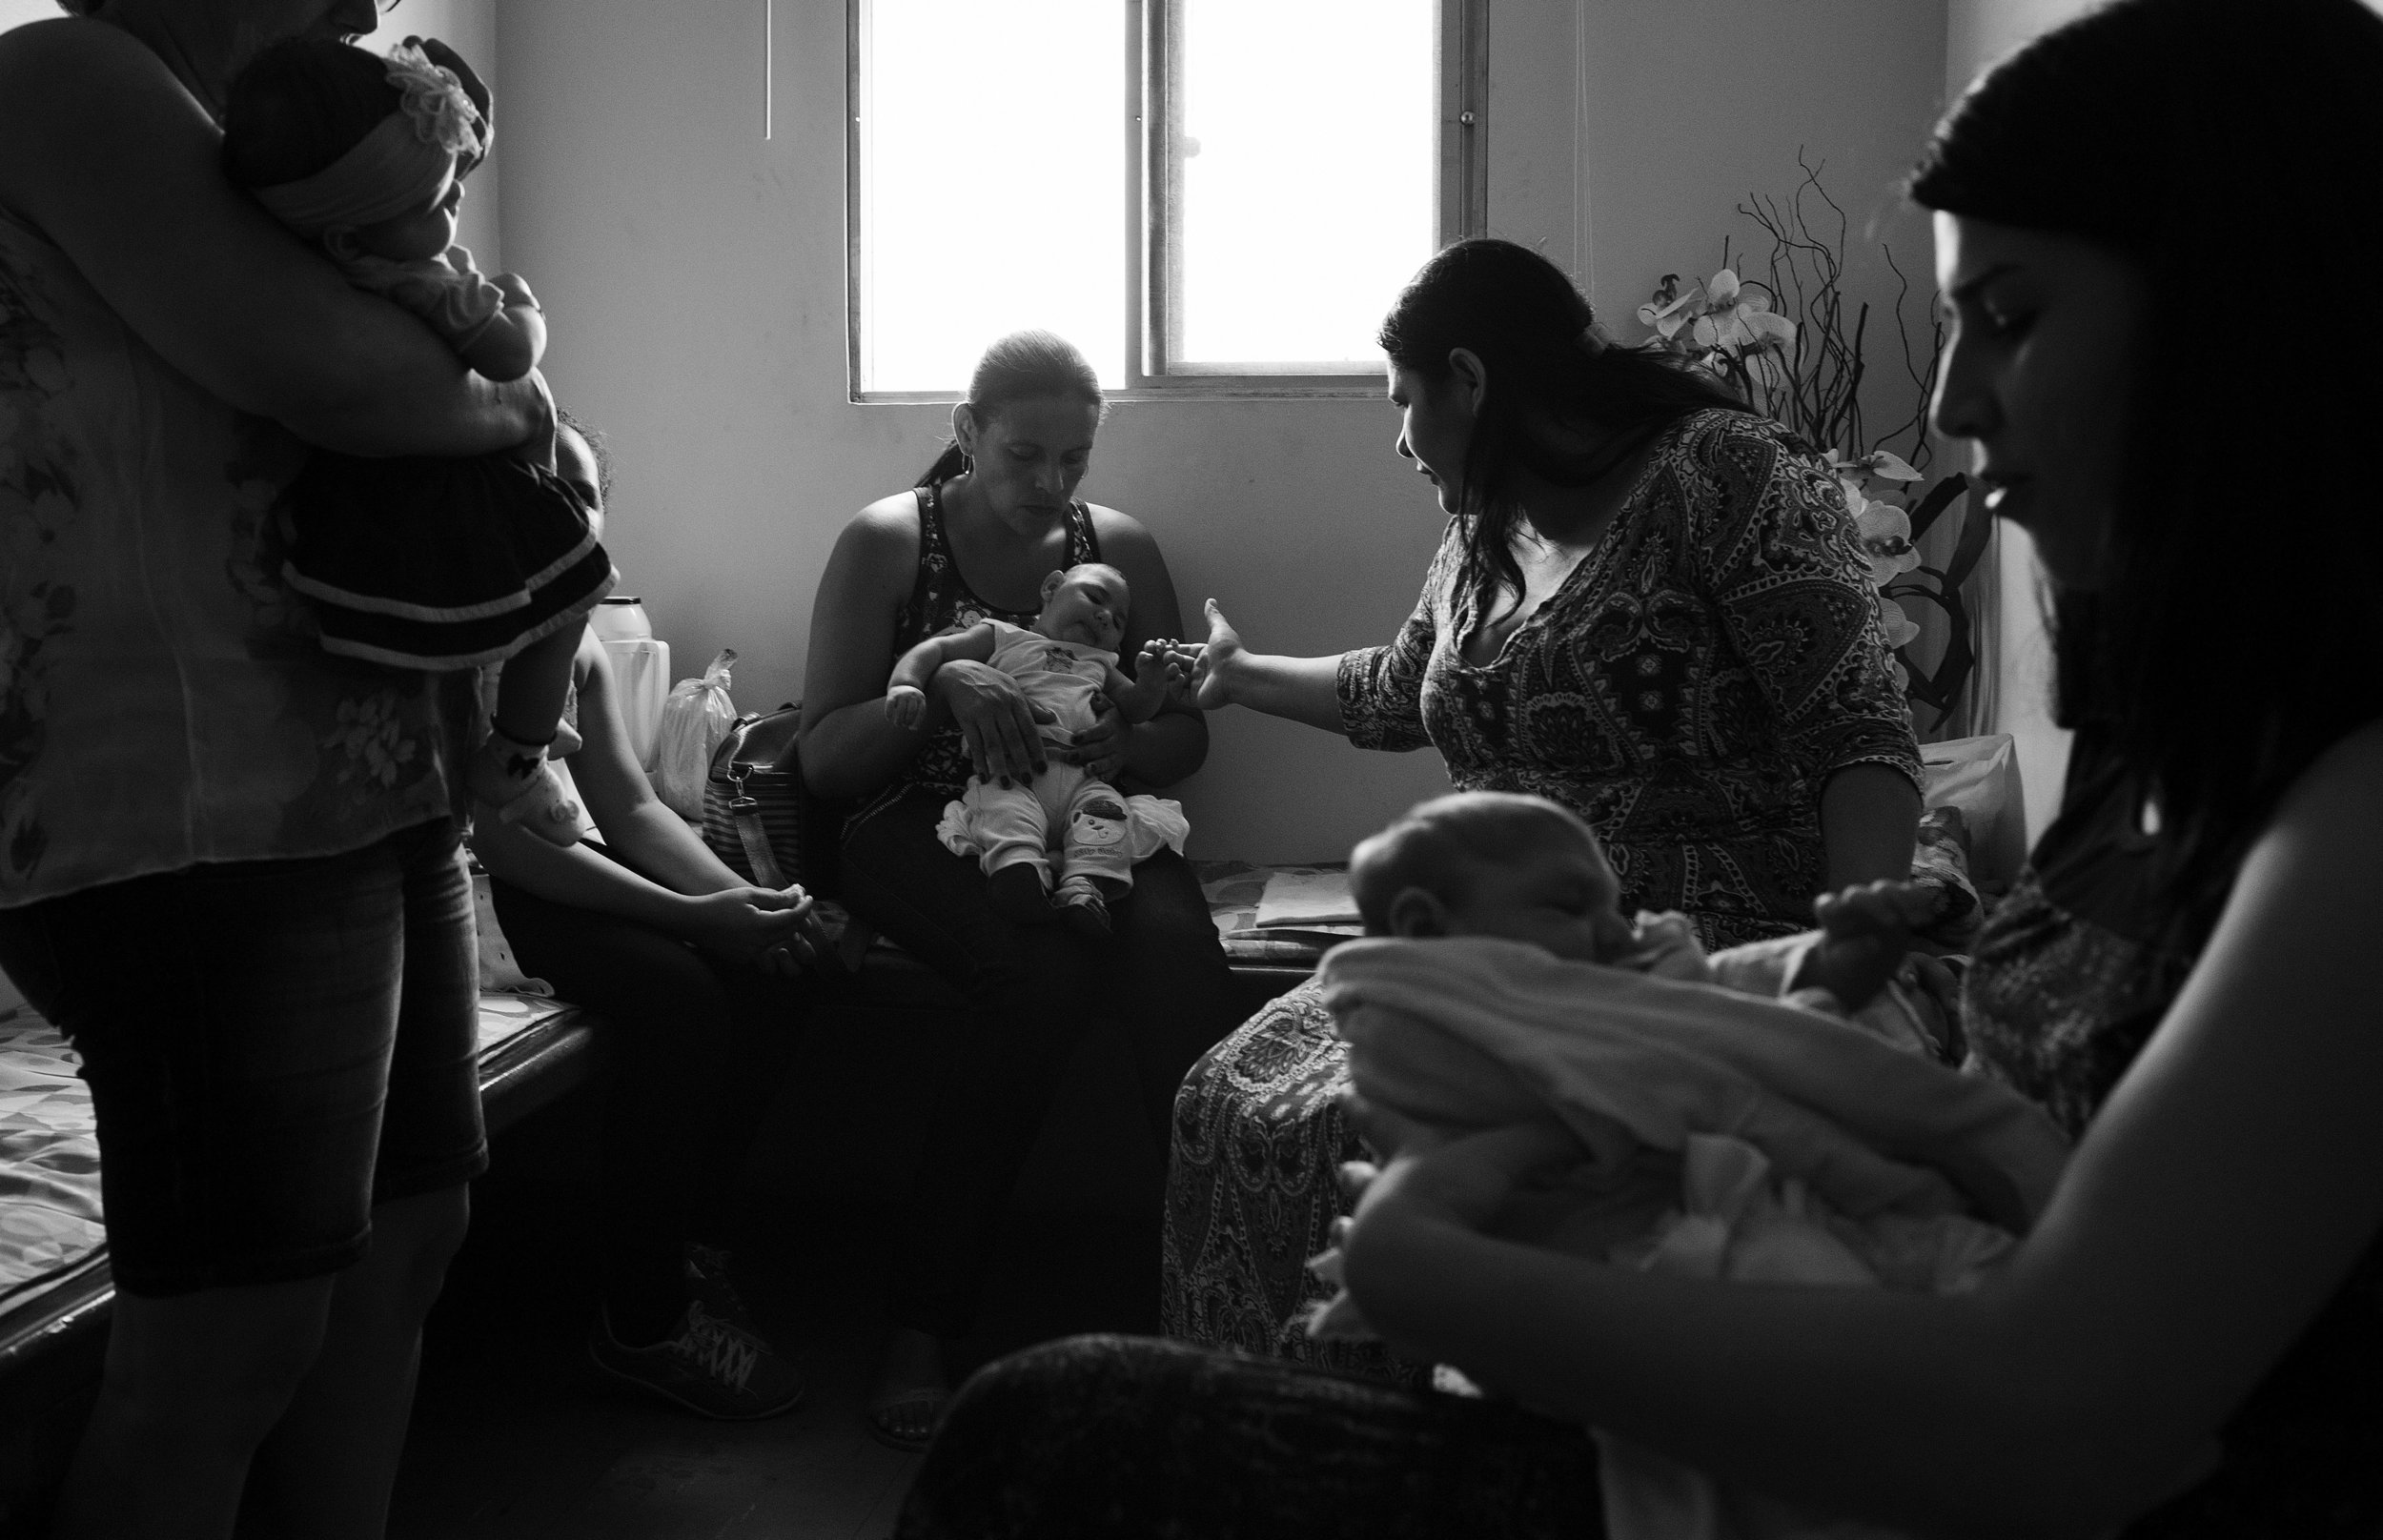  The wait is long for physiotherapy appointments for babies with microcephaly, so in the hallway outside of the therapy room, mothers gather and share coffee, cake and news about their babies. The hospital has become a refuge for families, a place wh